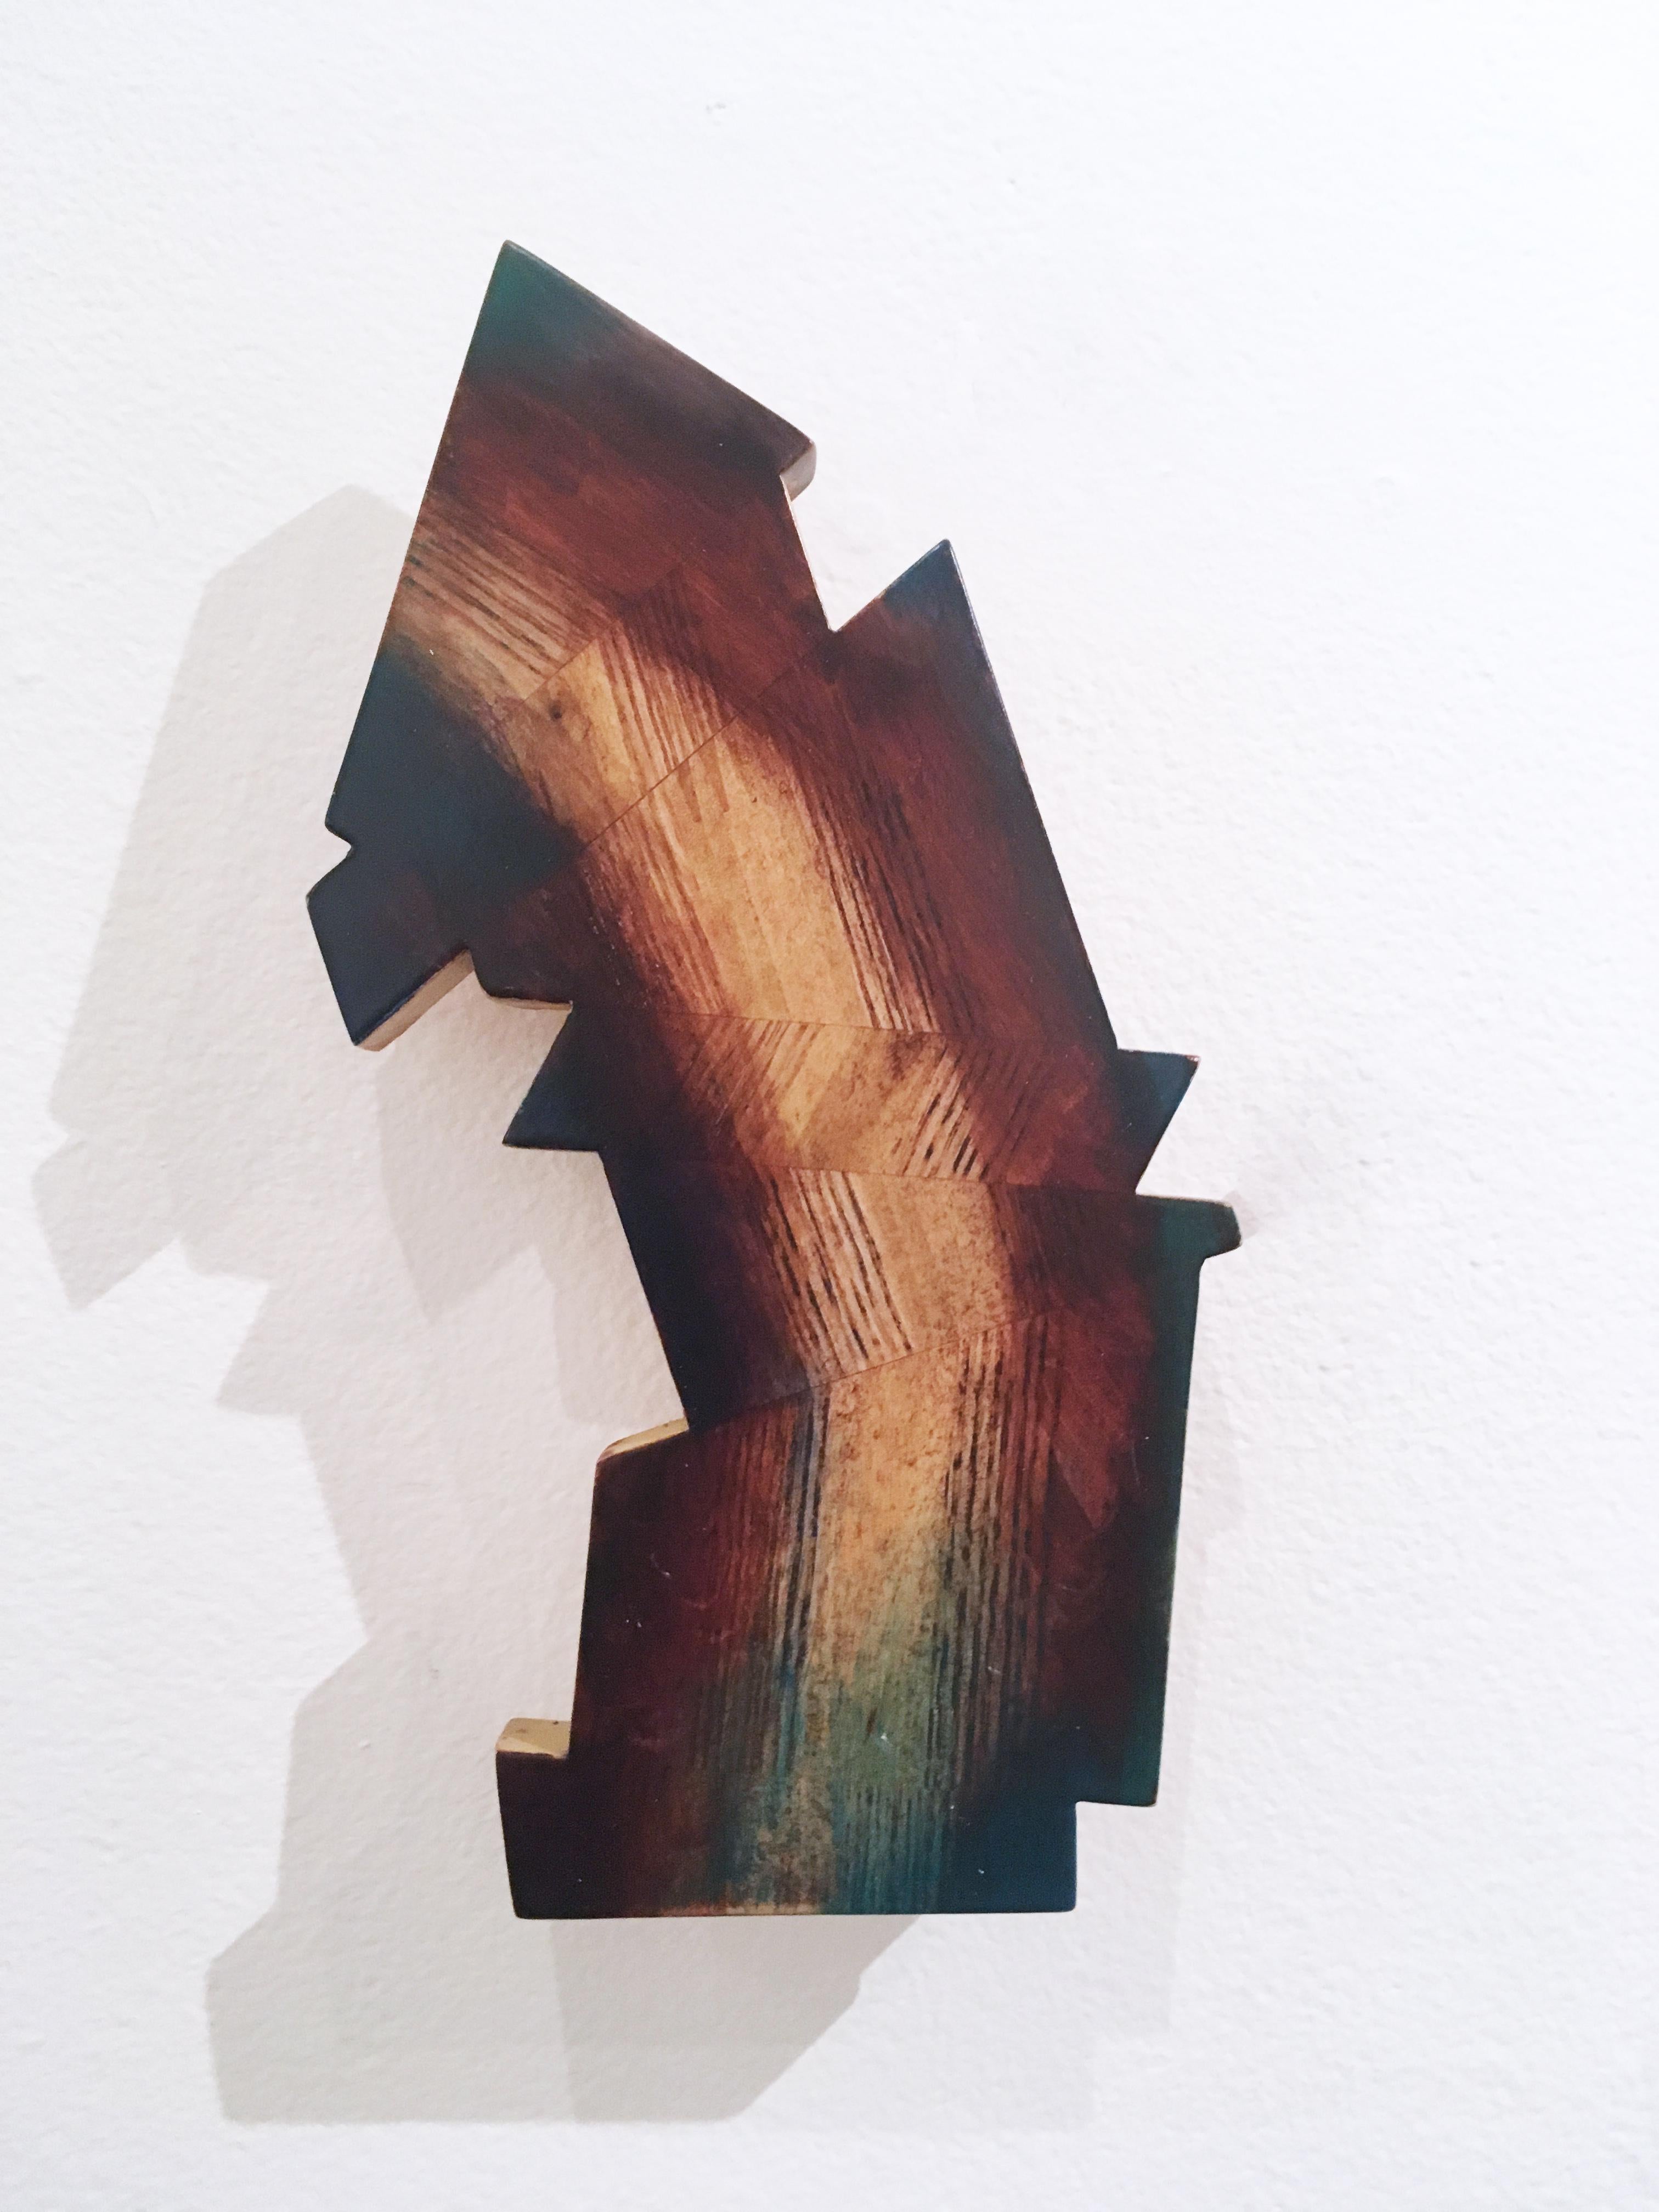 Untitled "Fragment 8" 2019, oil, varnish, wood, wall sculpture - Art by Tom Banks